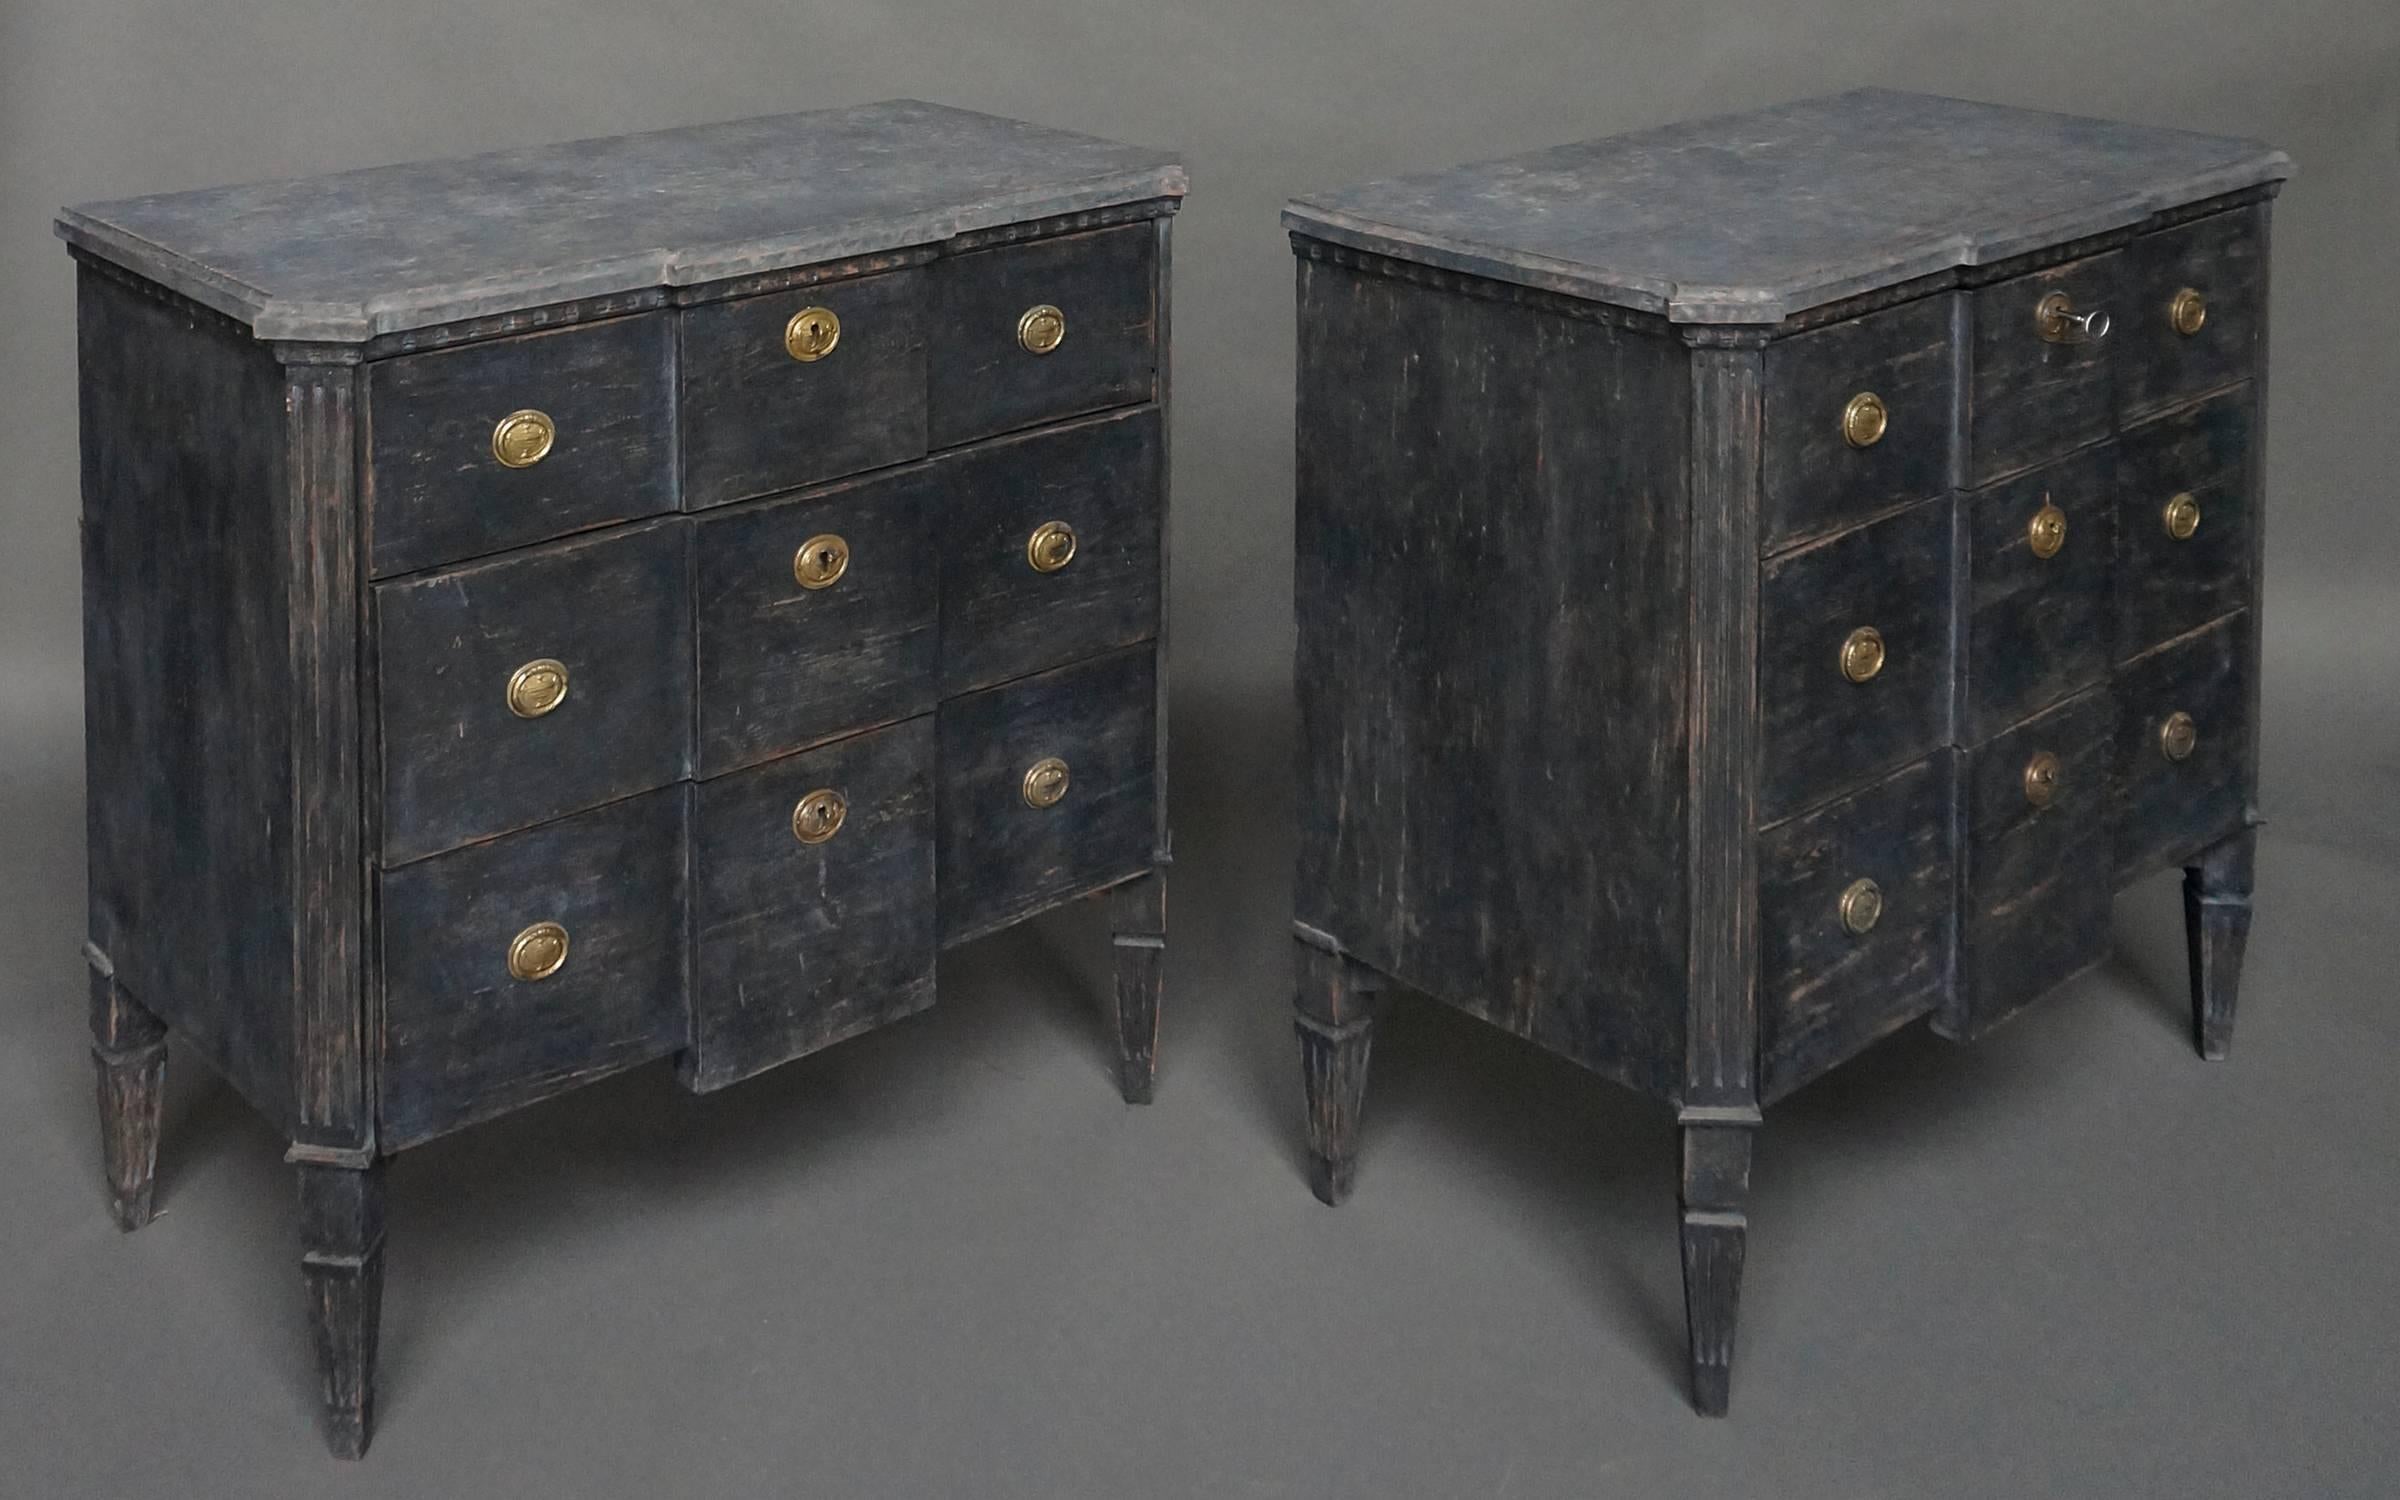 Pair of commodes in the late Gustavian style, Sweden, circa 1840. Three full-width drawers under a faux stone top with a dentil frieze. Canted corners with reeded corner posts which extend into tapering square legs. Versatile small size.